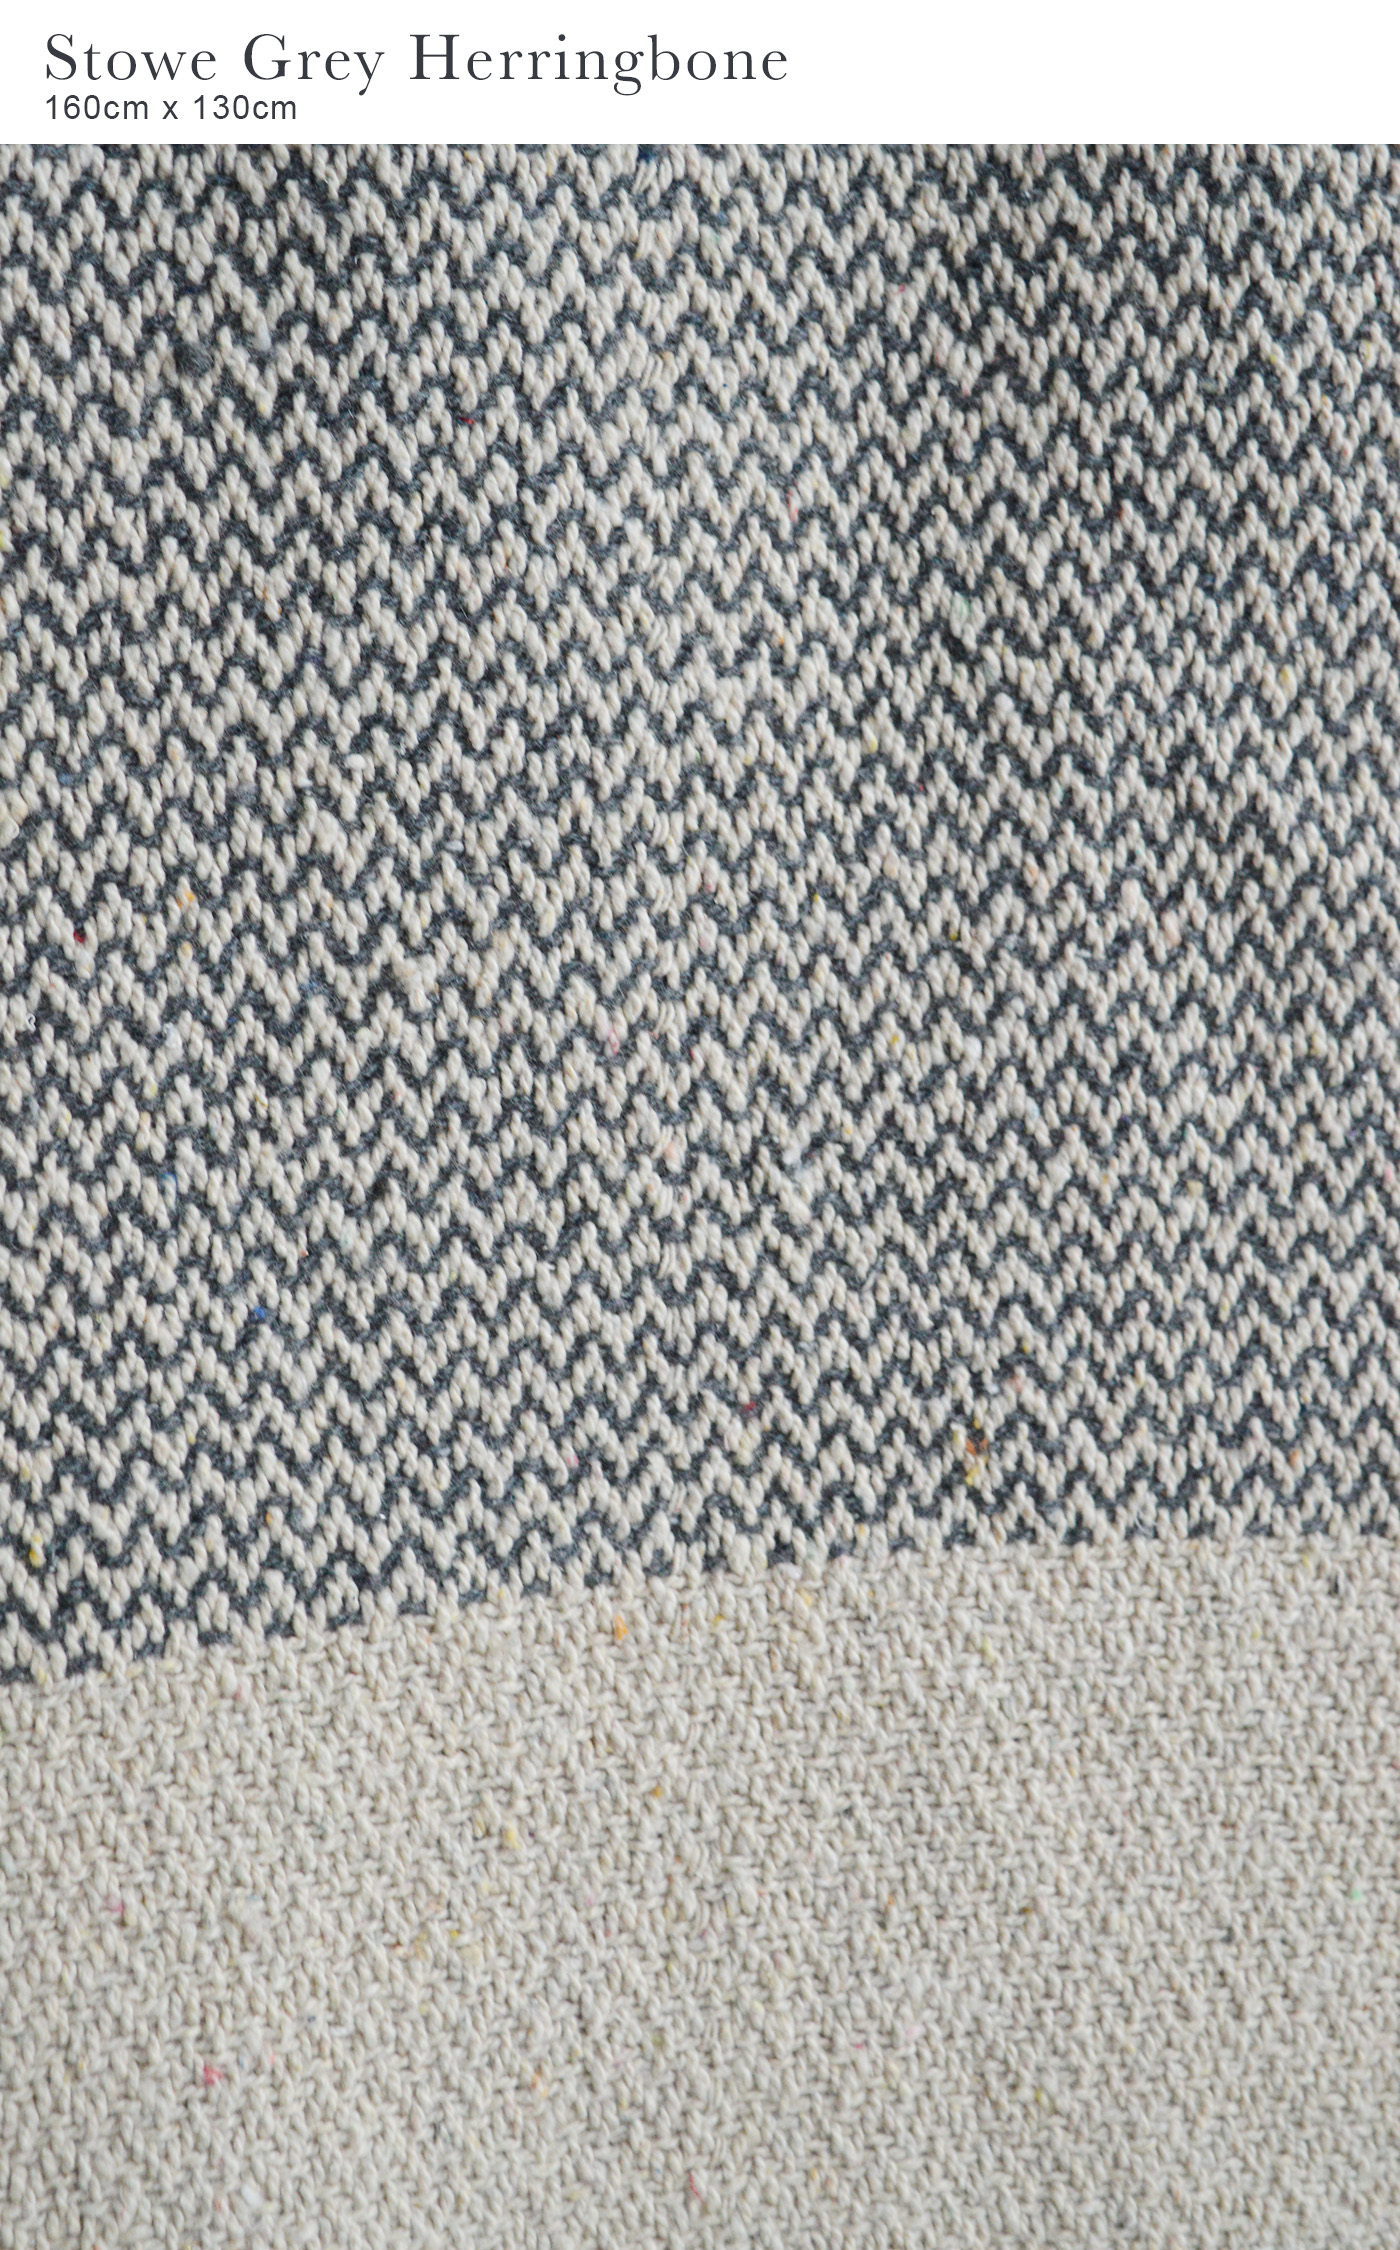 Stowe throws in blues, greys and natural coloures  for interiors in New England styles modern farmhouse, country, coastal and city homes - Grey Herringbone